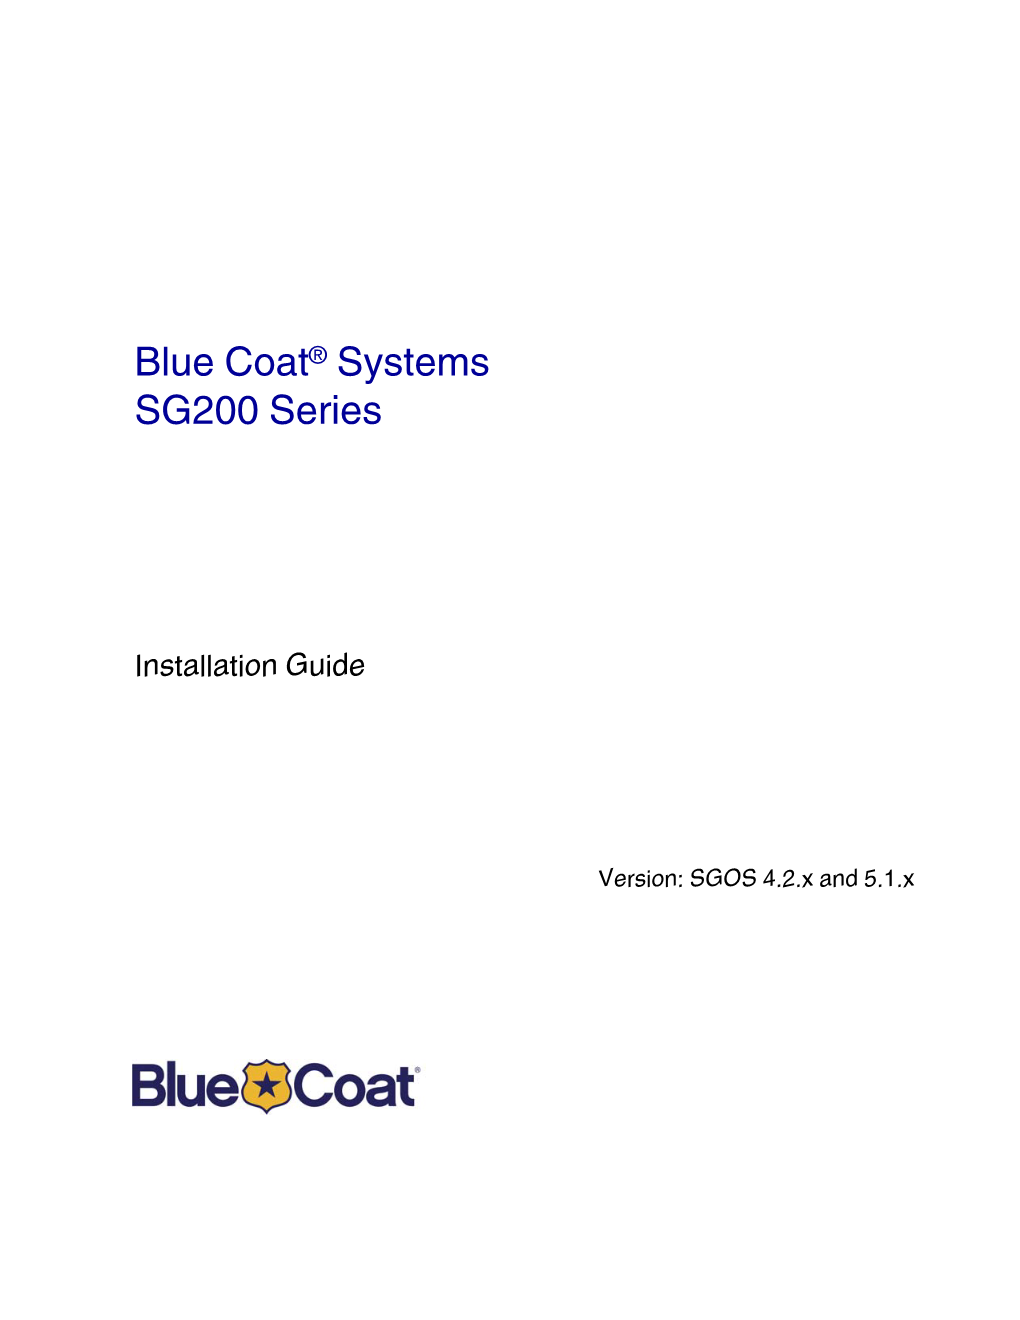 Blue Coat® Systems SG200 Series